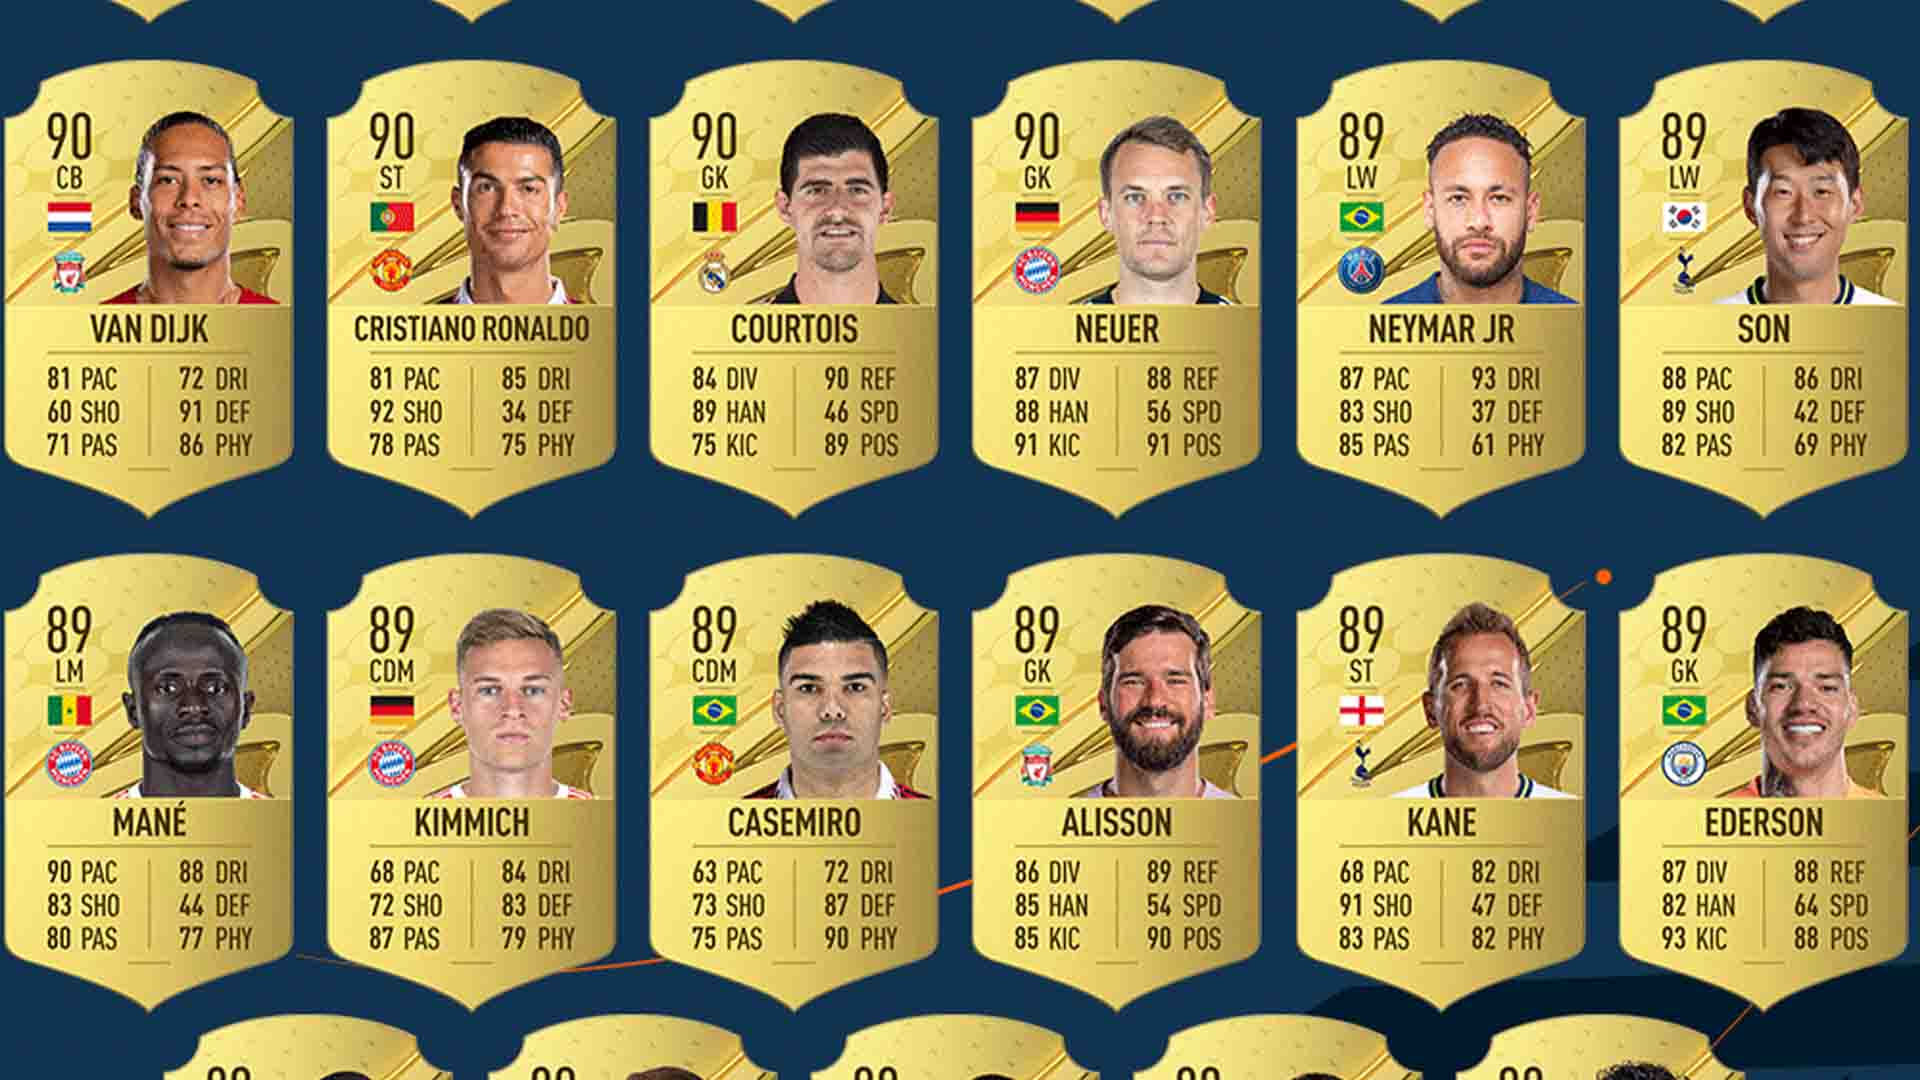 FIFA 23, TOP 50 BEST PLAYER RATINGS! 😱🔥